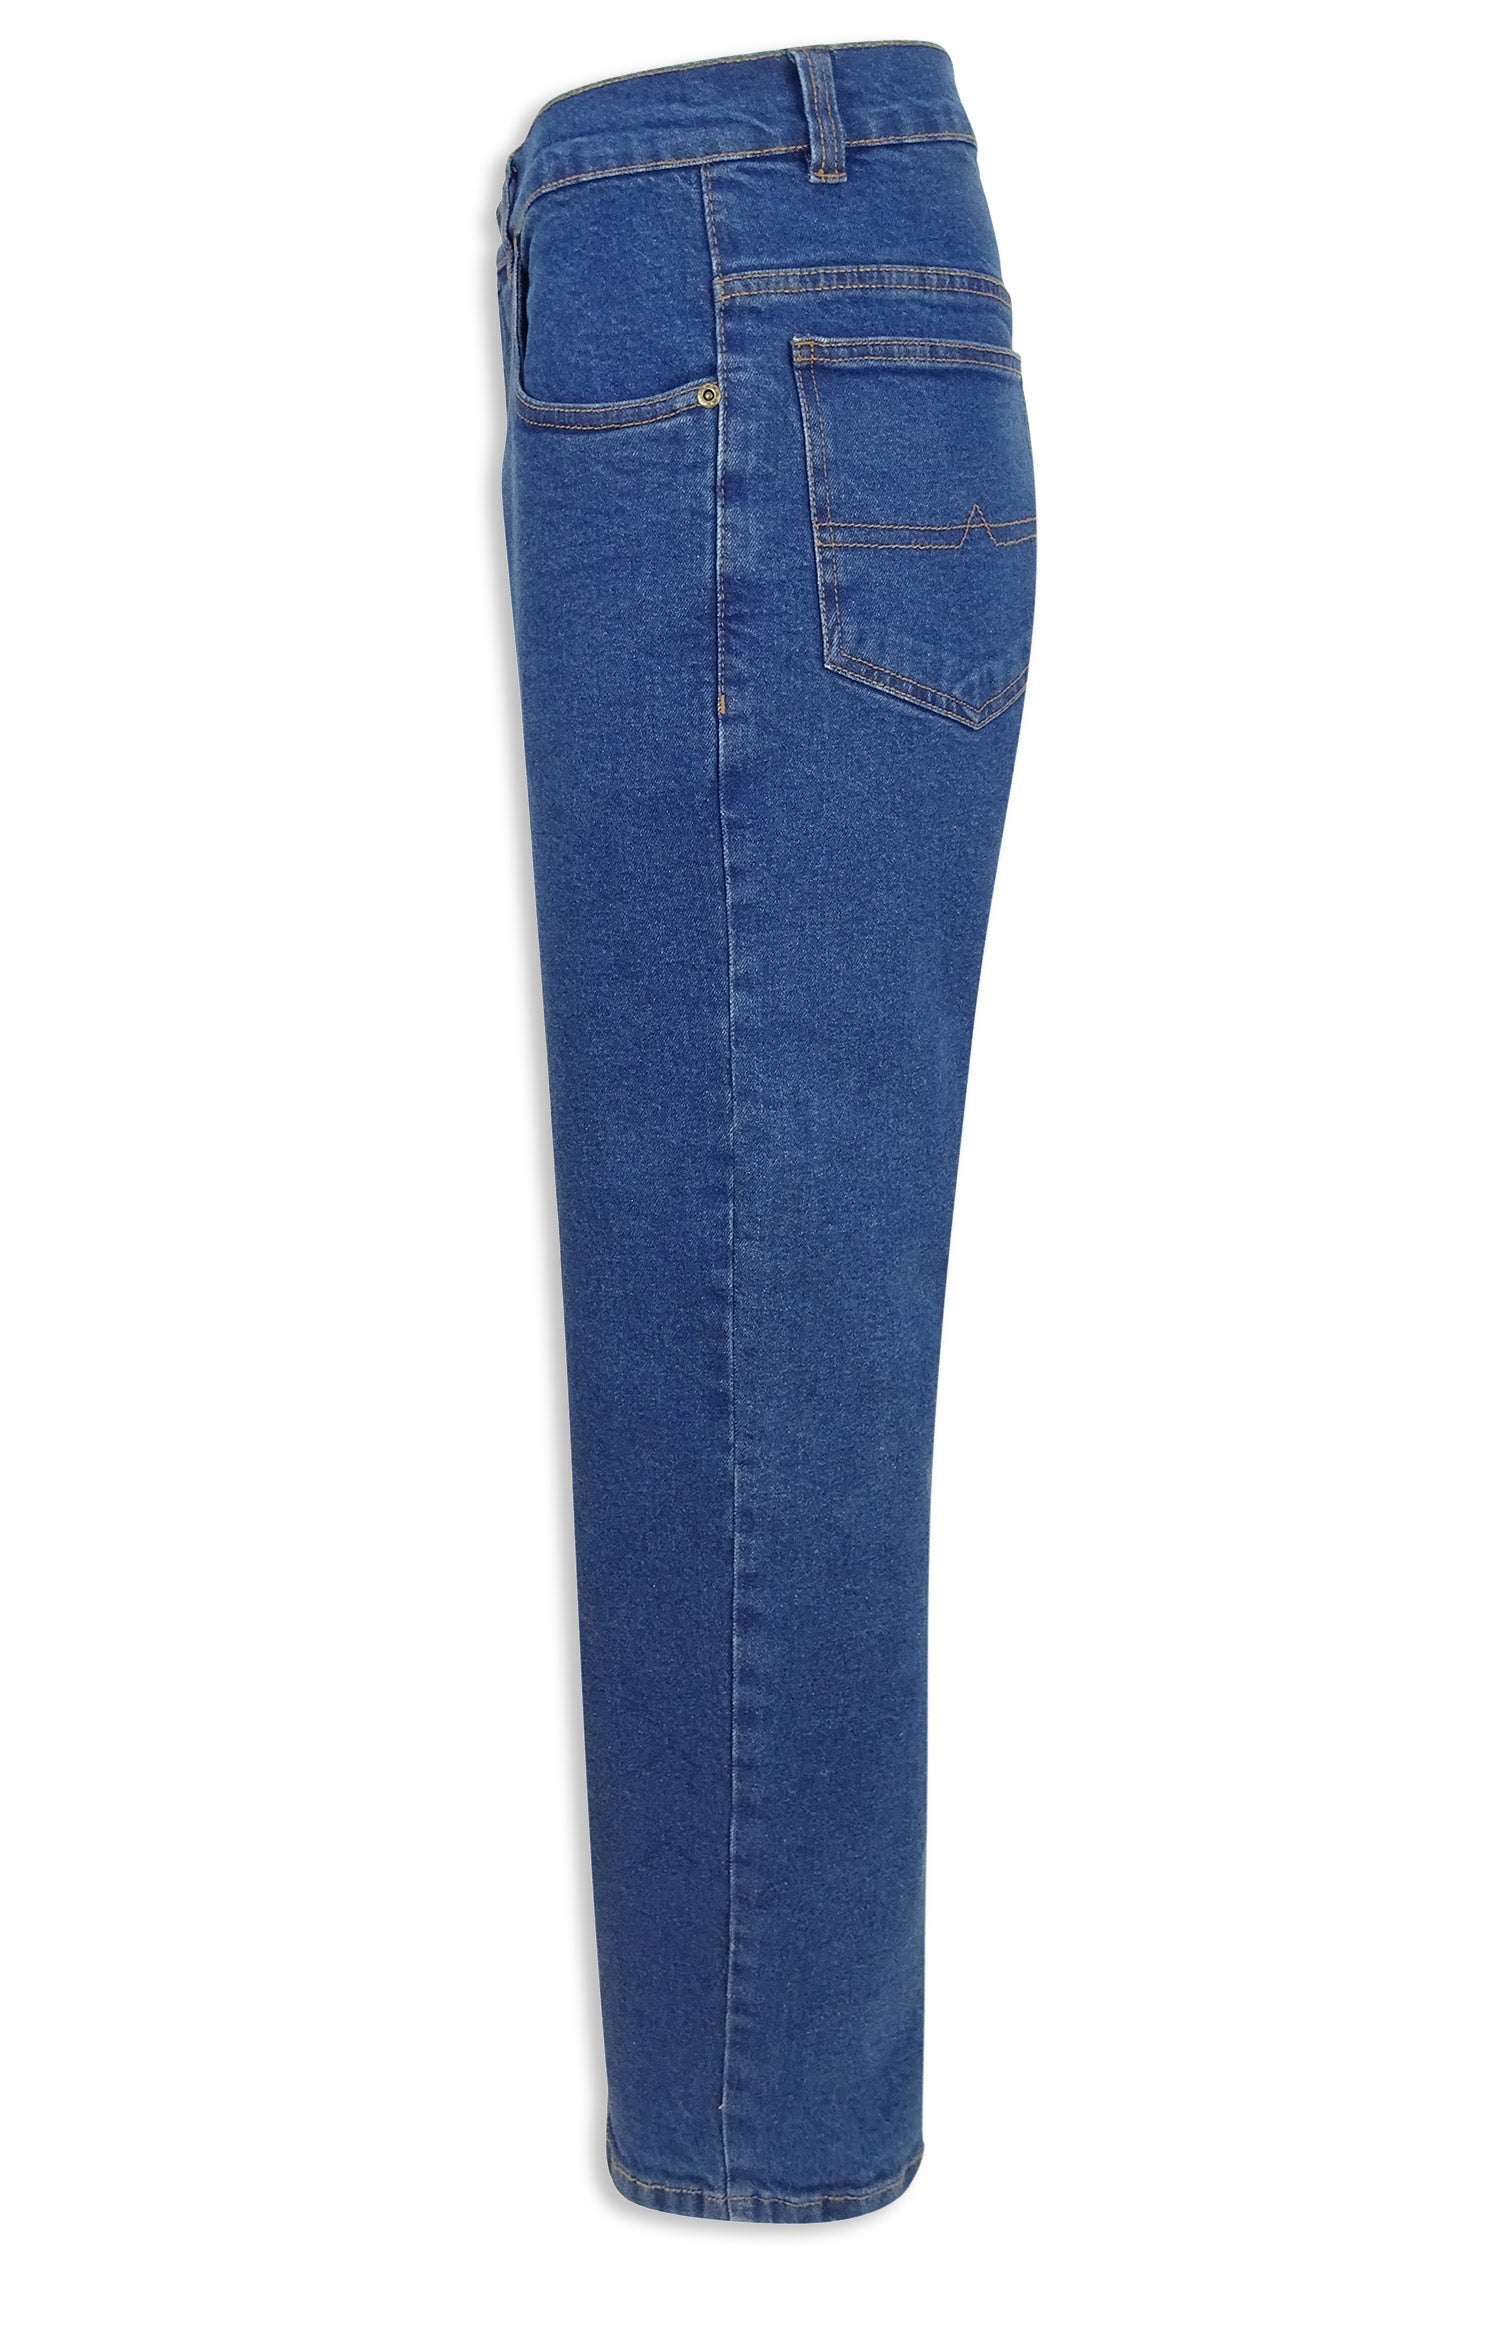 Classic work jeans  Hoggs of Fife Pro Workwear